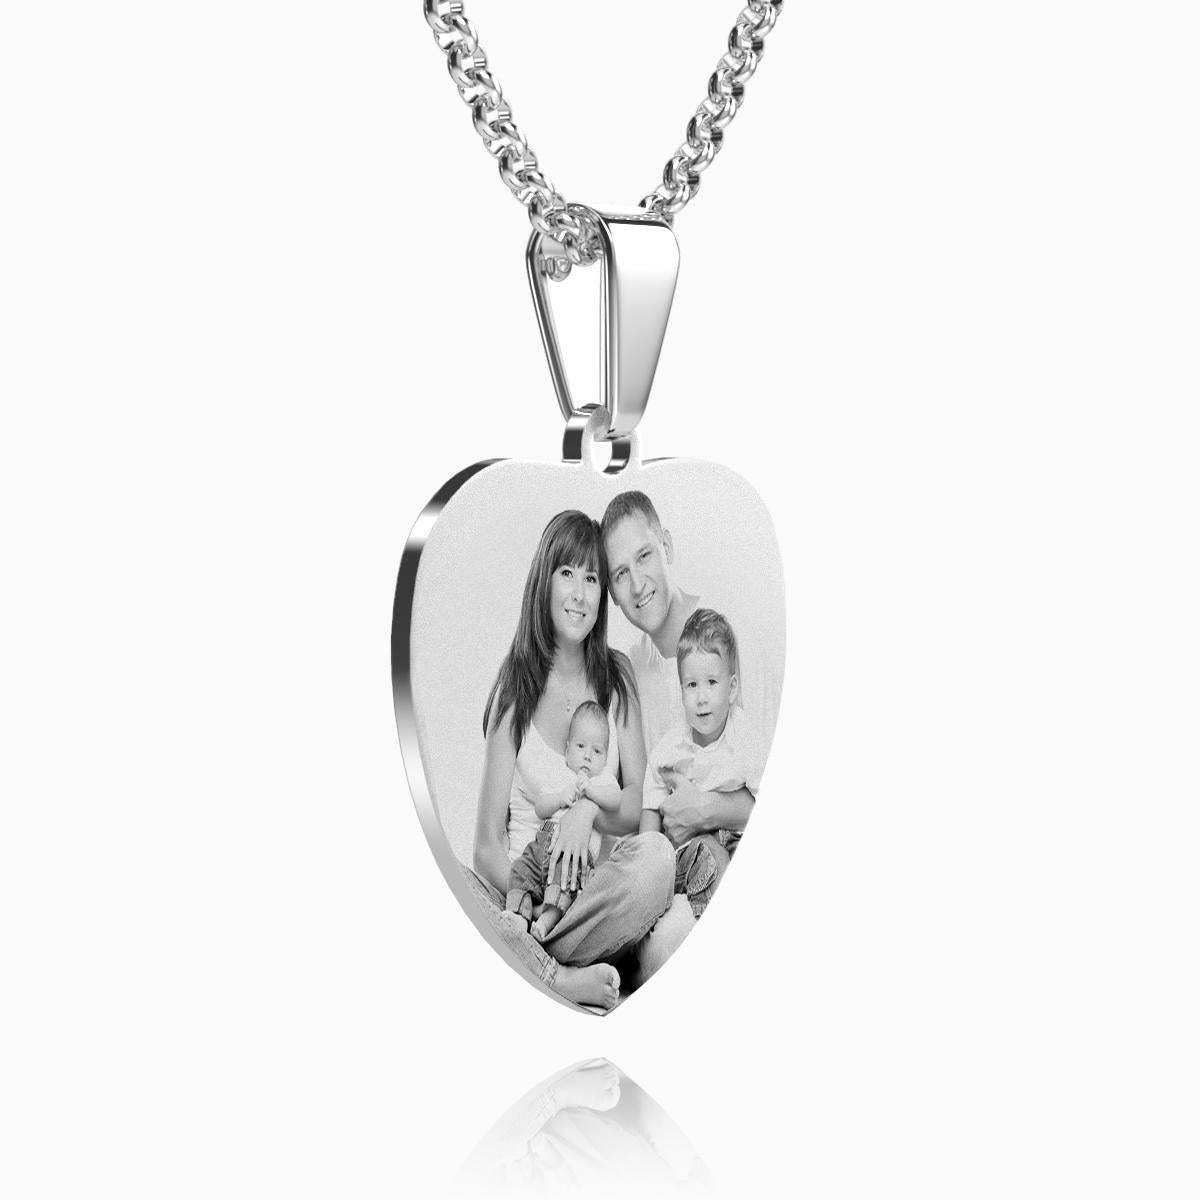 Women's Heart Photo Engraved Tag Necklace With Engraving Stainless Steel Gifts For Family